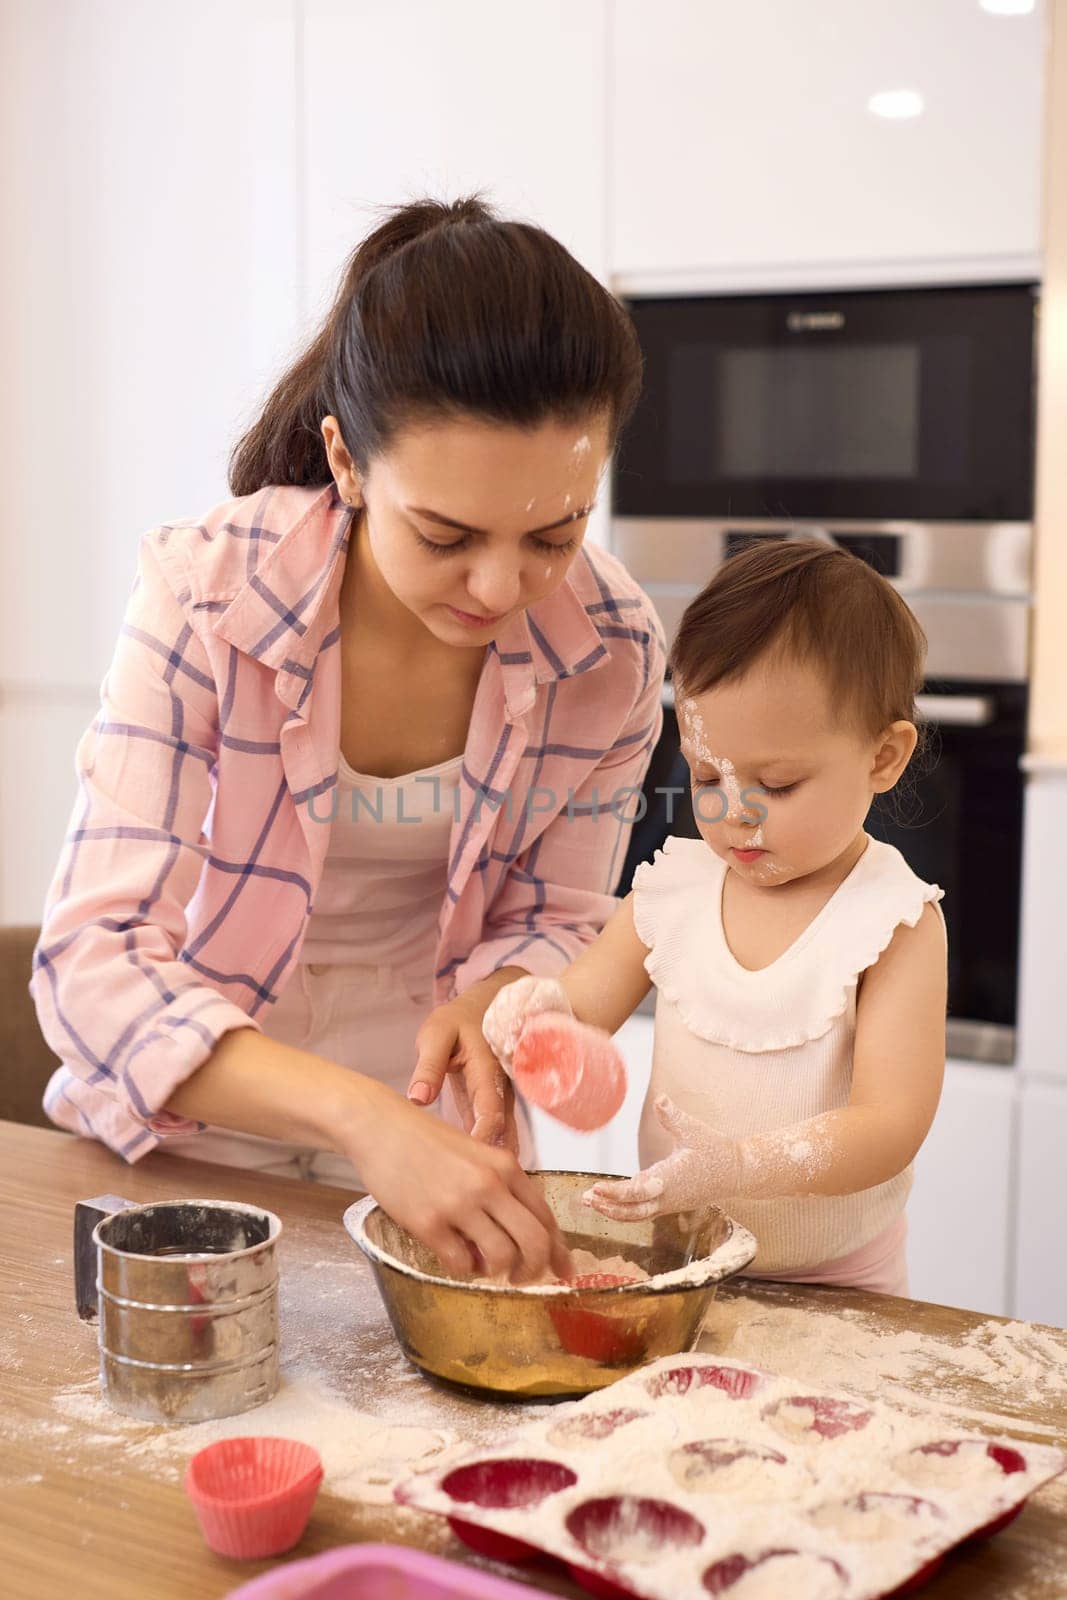 mother and little baby girl preparing the dough in the kitchen, bake cookies. happy time together